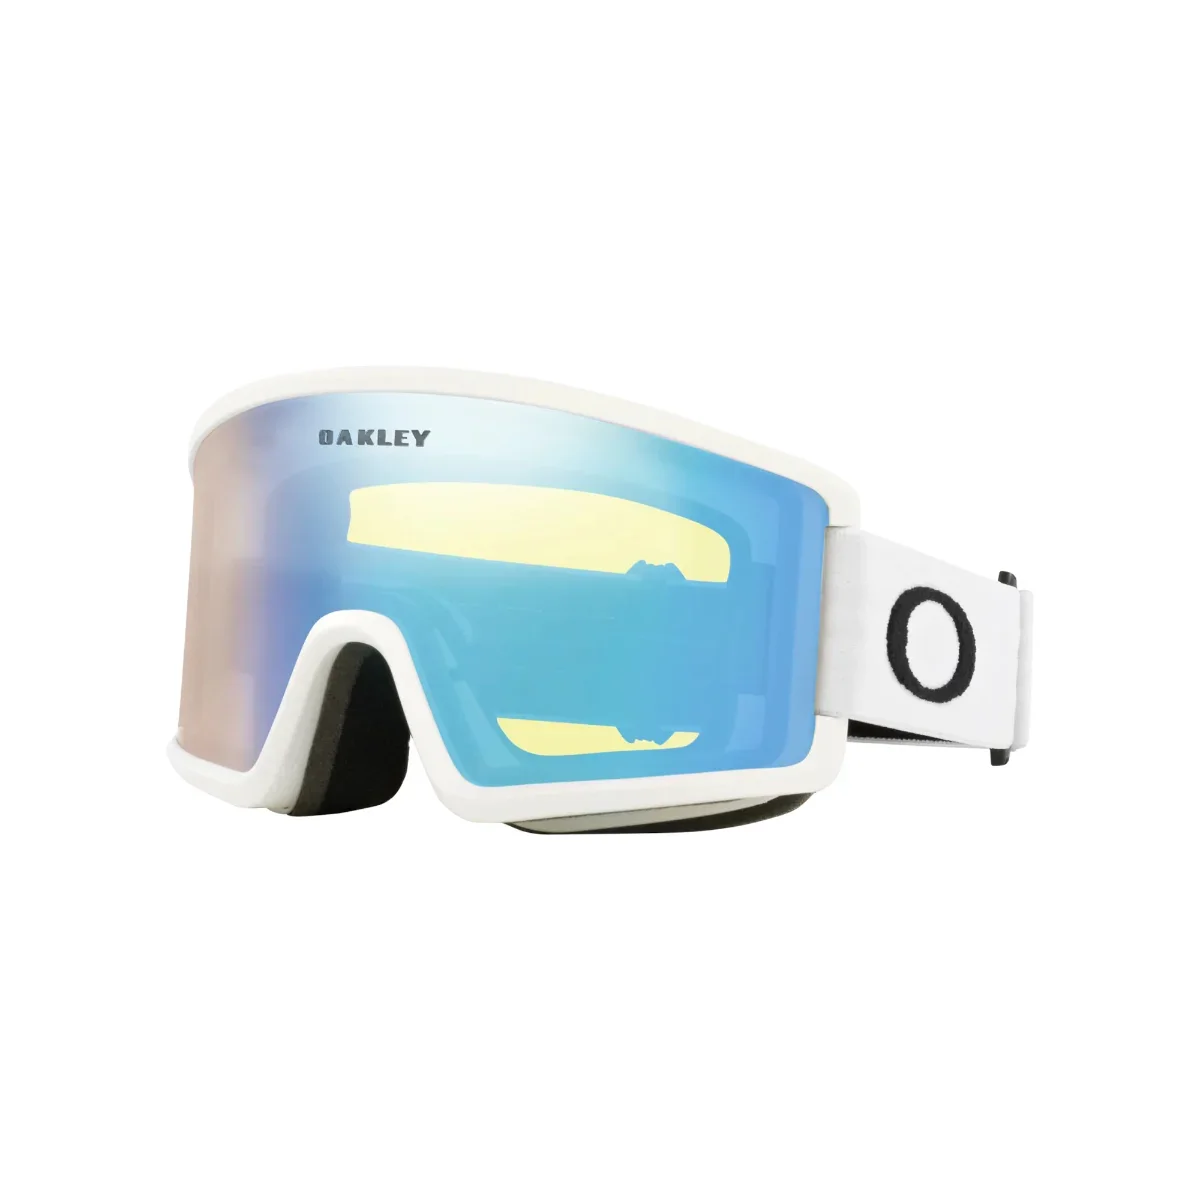 Oakley Target Line M Goggles + High Intensity Yellow Lens